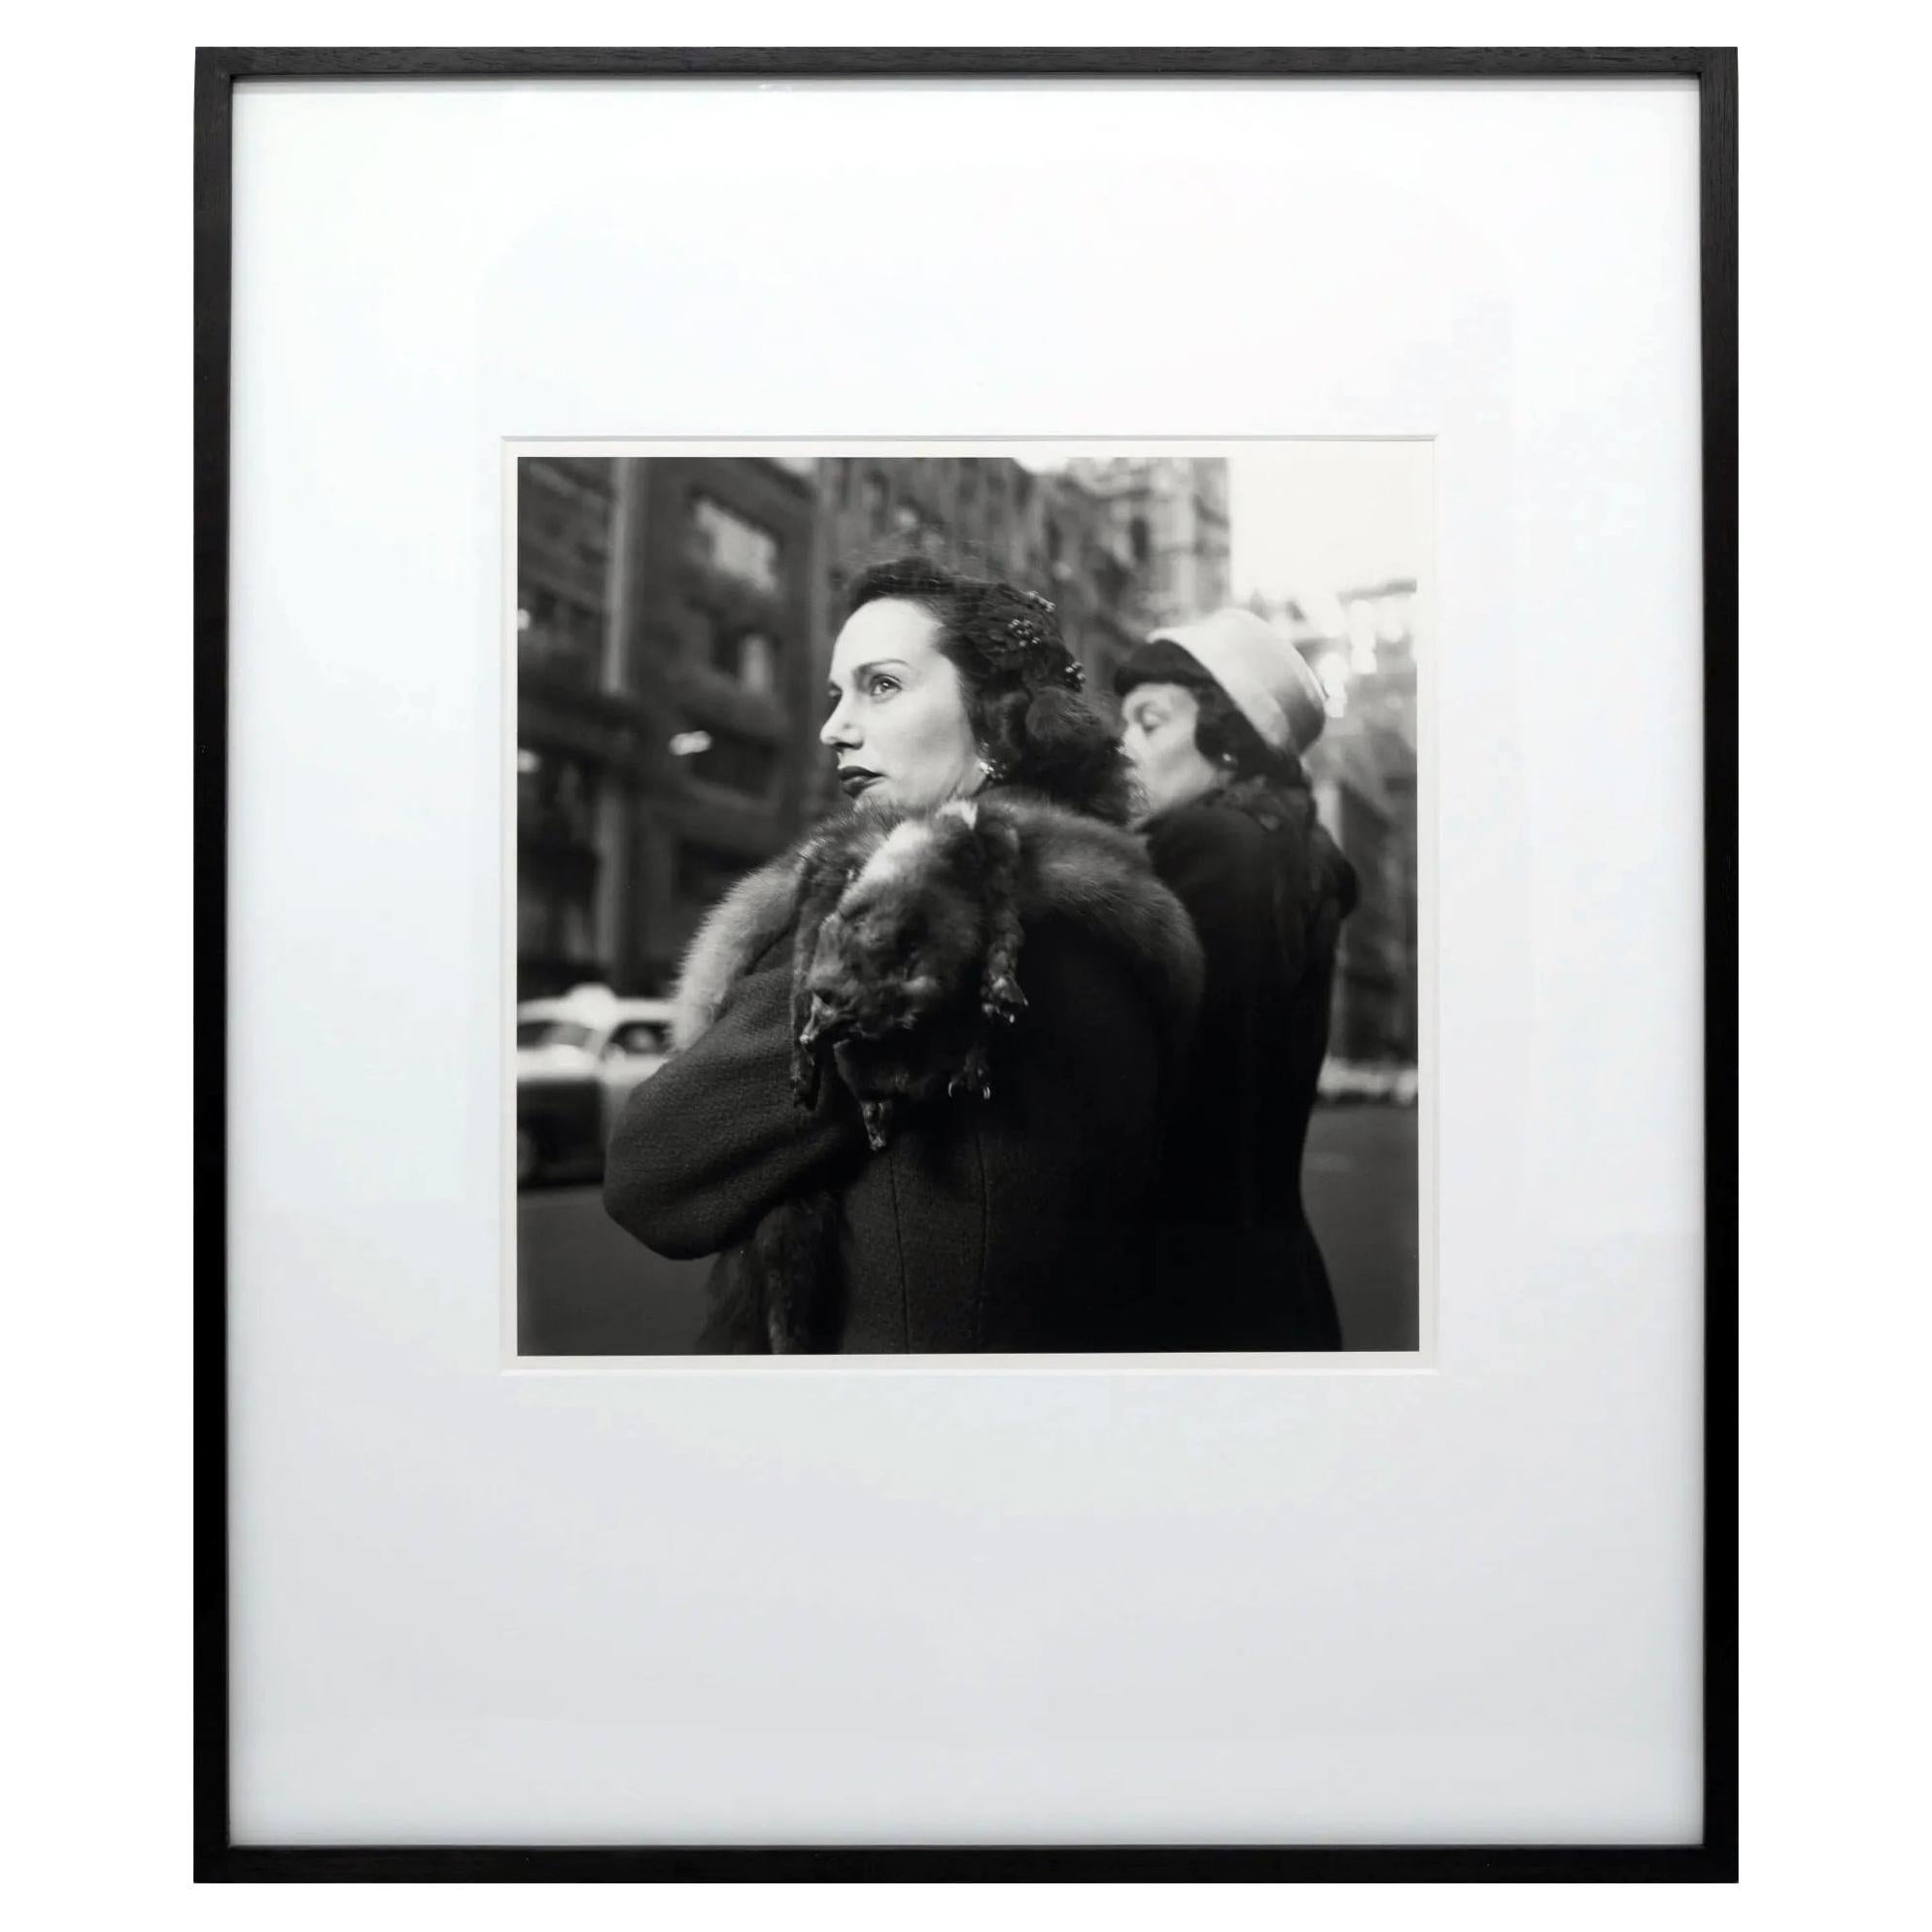 Framed Street Photograph by Vivian Maier Editioned with Provenance For Sale